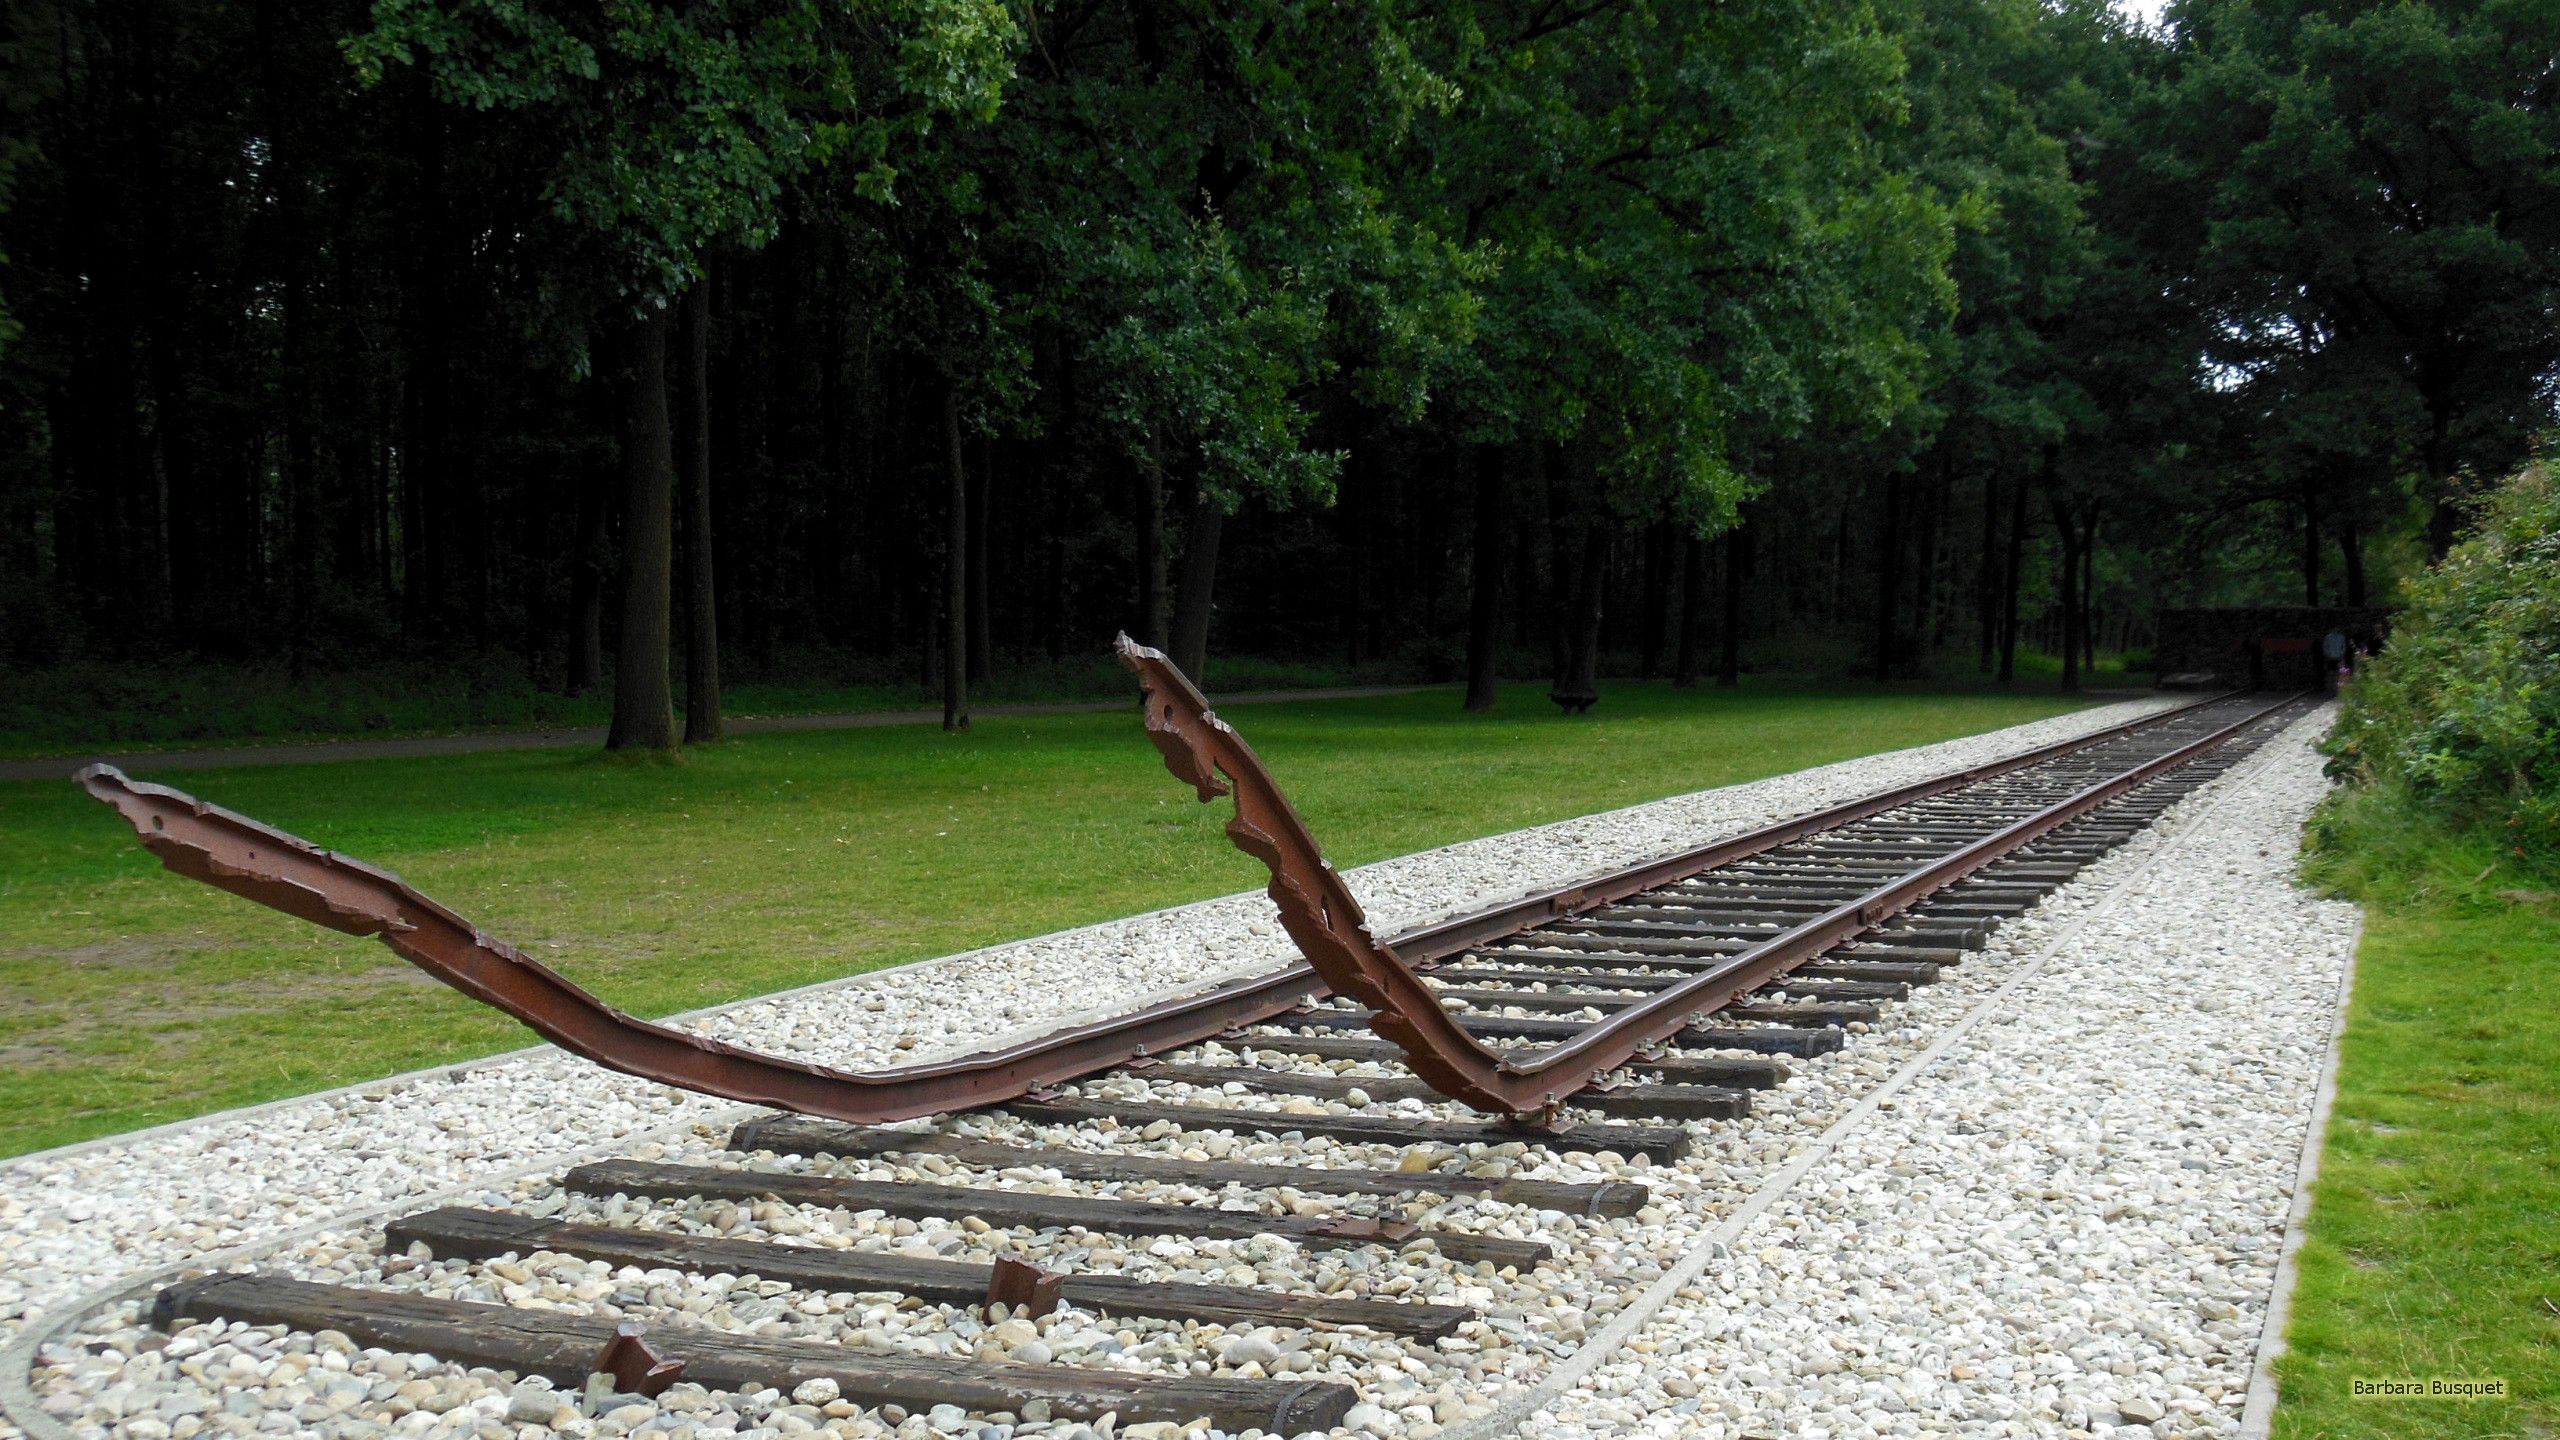 Railway track in The Netherlands's HD Wallpaper